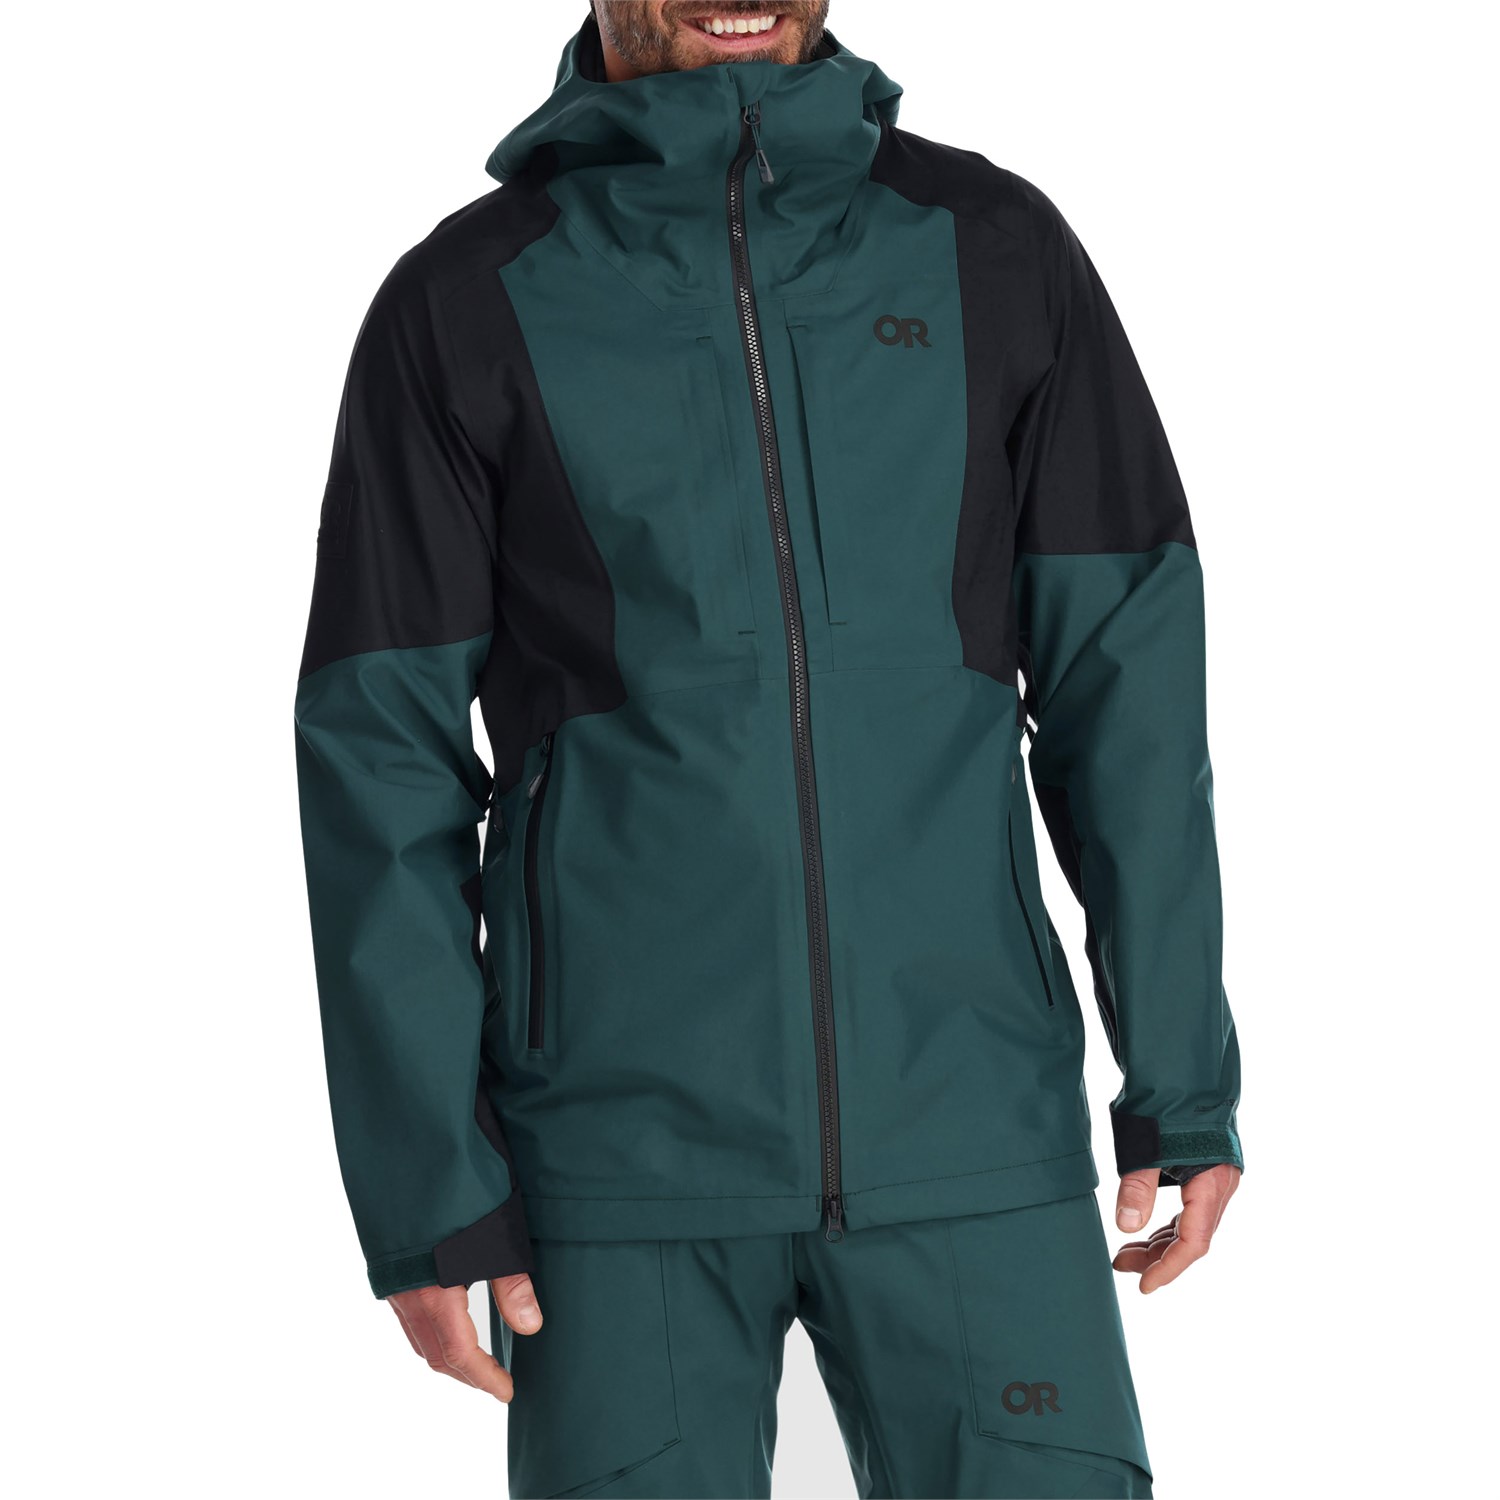 Outdoor Research Skytour AscentShell Jacket | evo